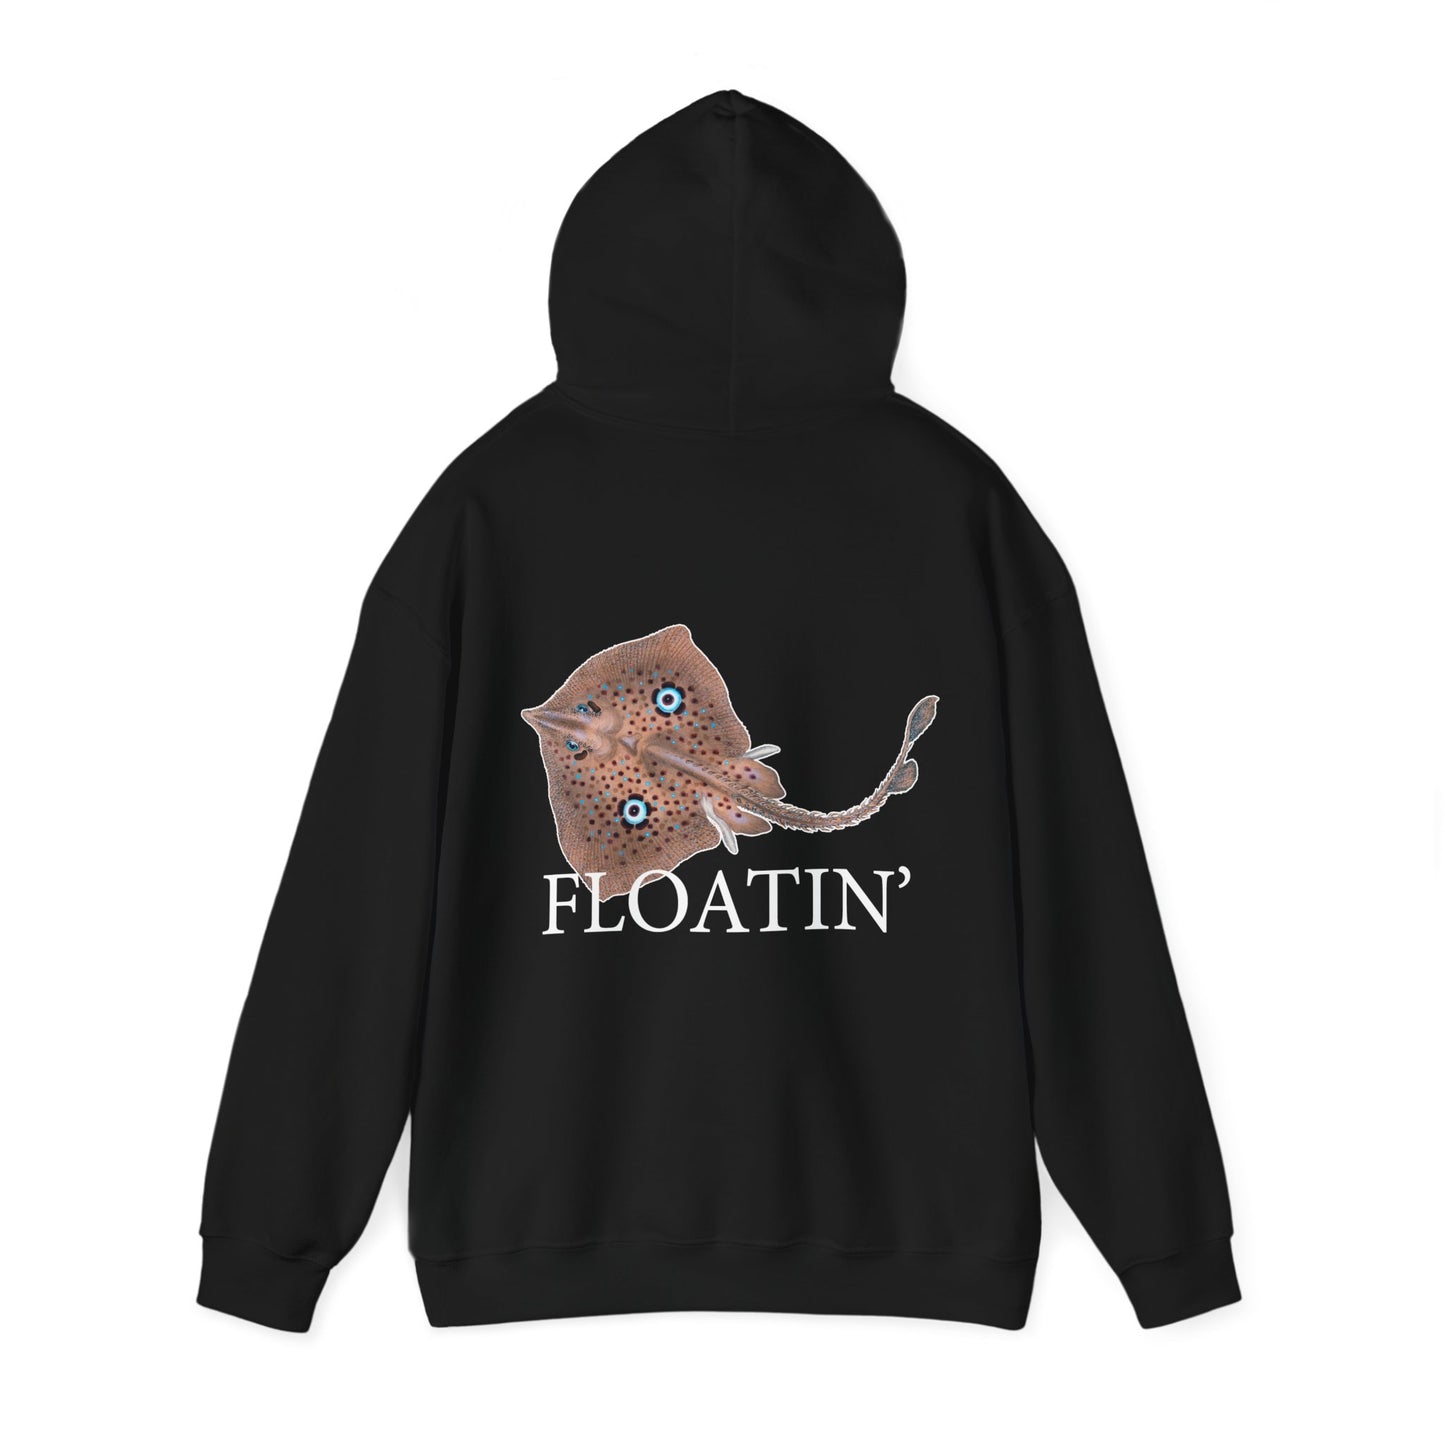 Floatin' - Hooded Edition